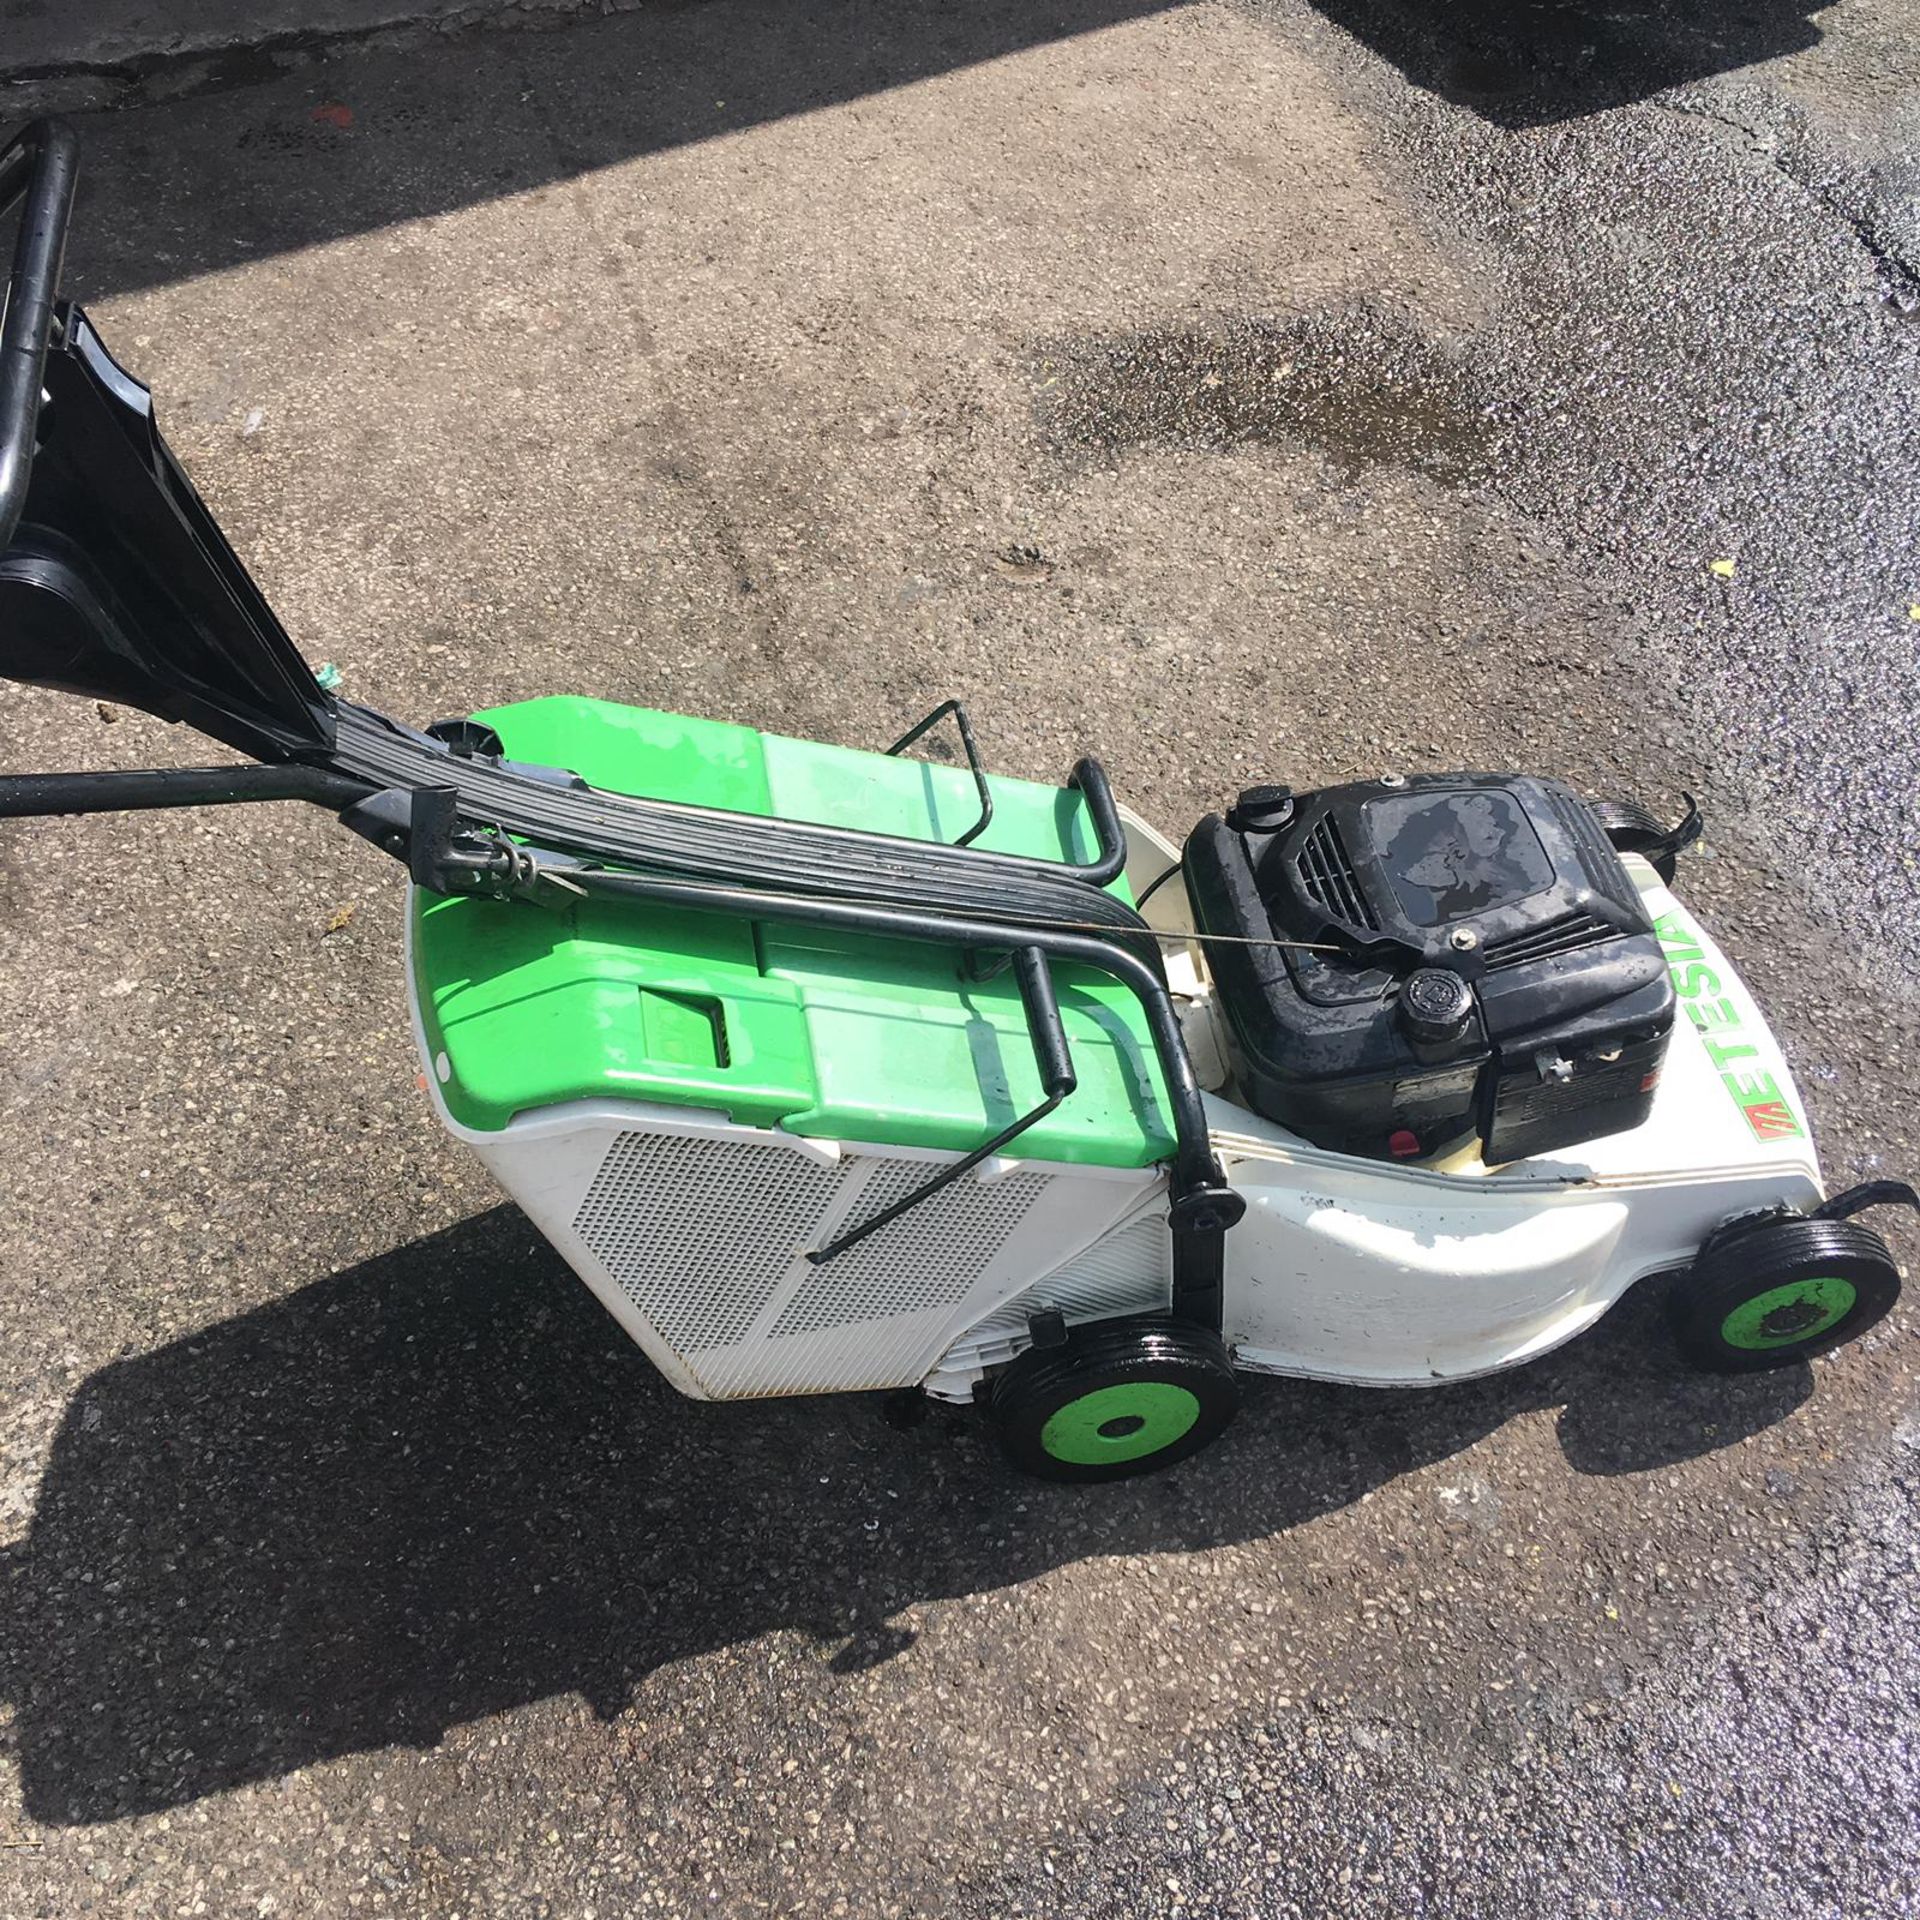 4 X WALK BEHIND PUSH MOWERS ALL SOLD AS ONE LOT - NO RESERVE! *NO VAT* - Image 4 of 16